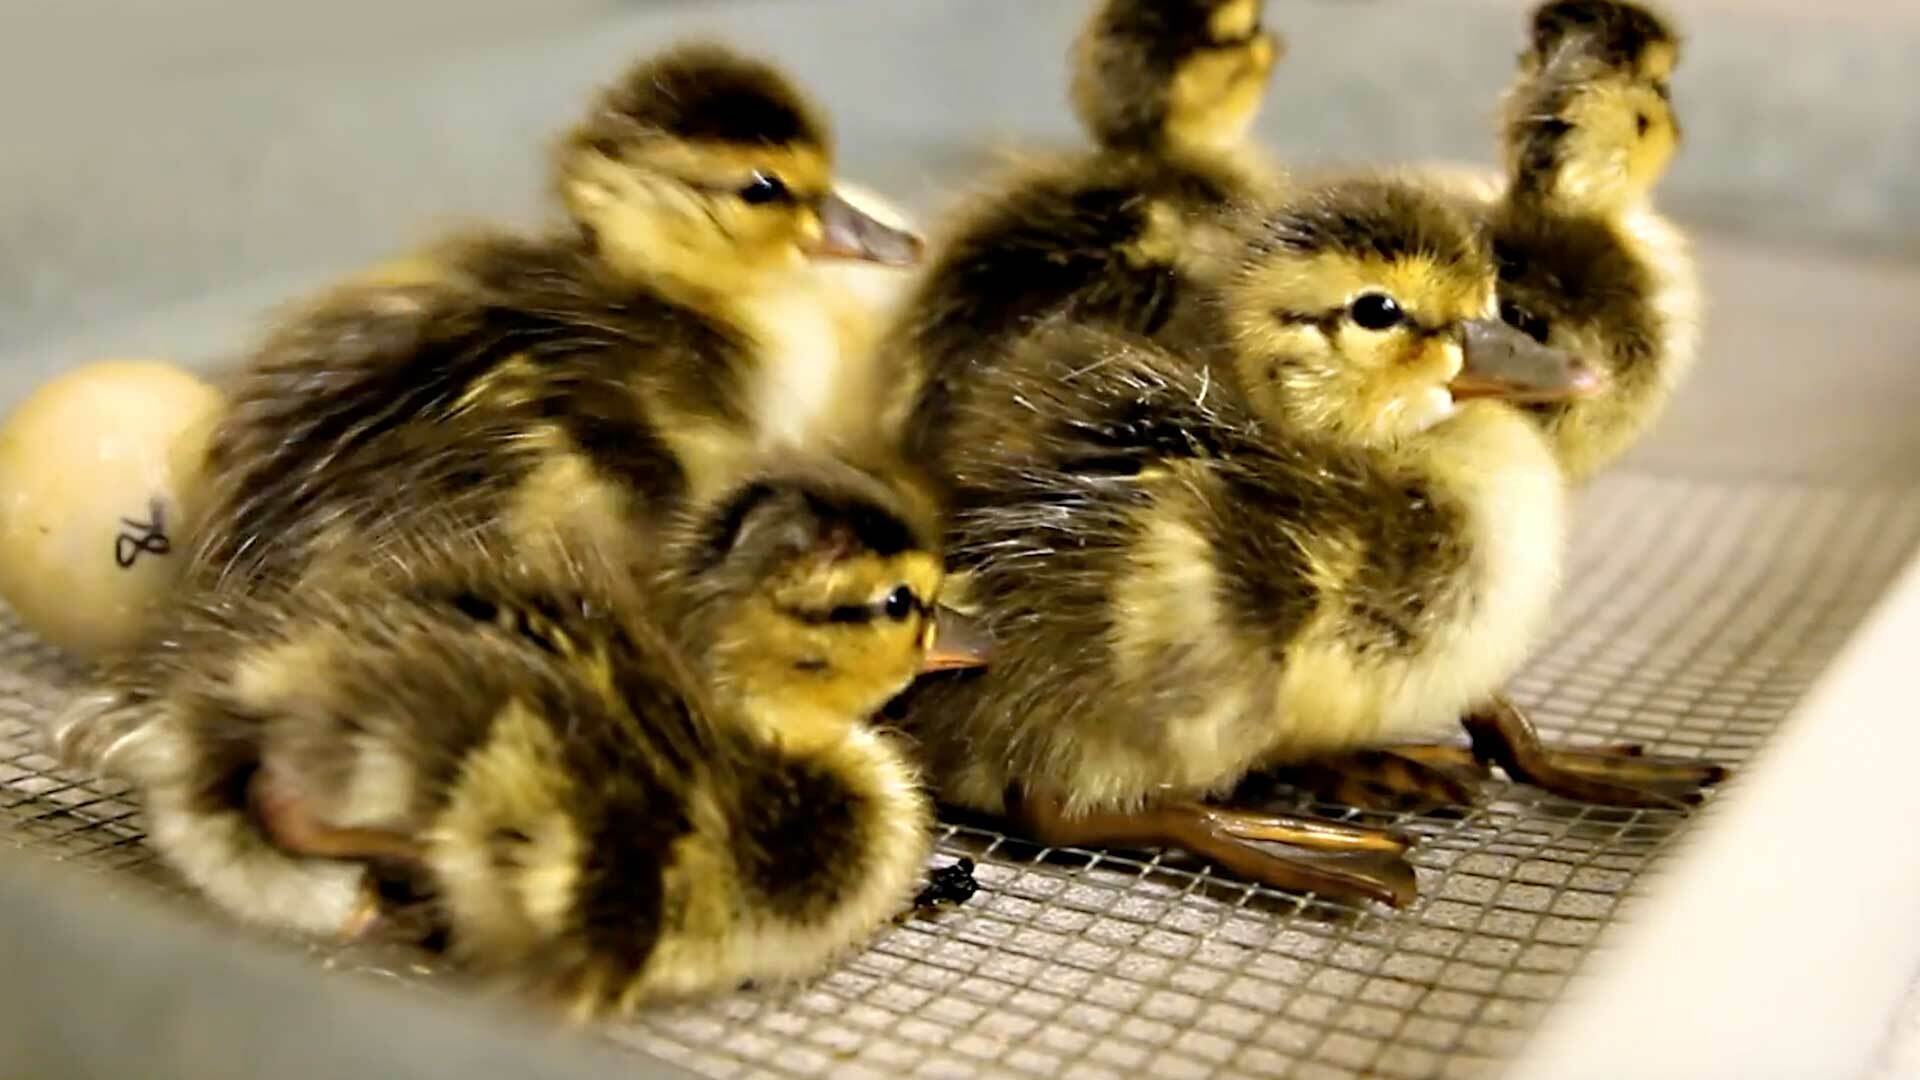 group of baby ducks sitting together